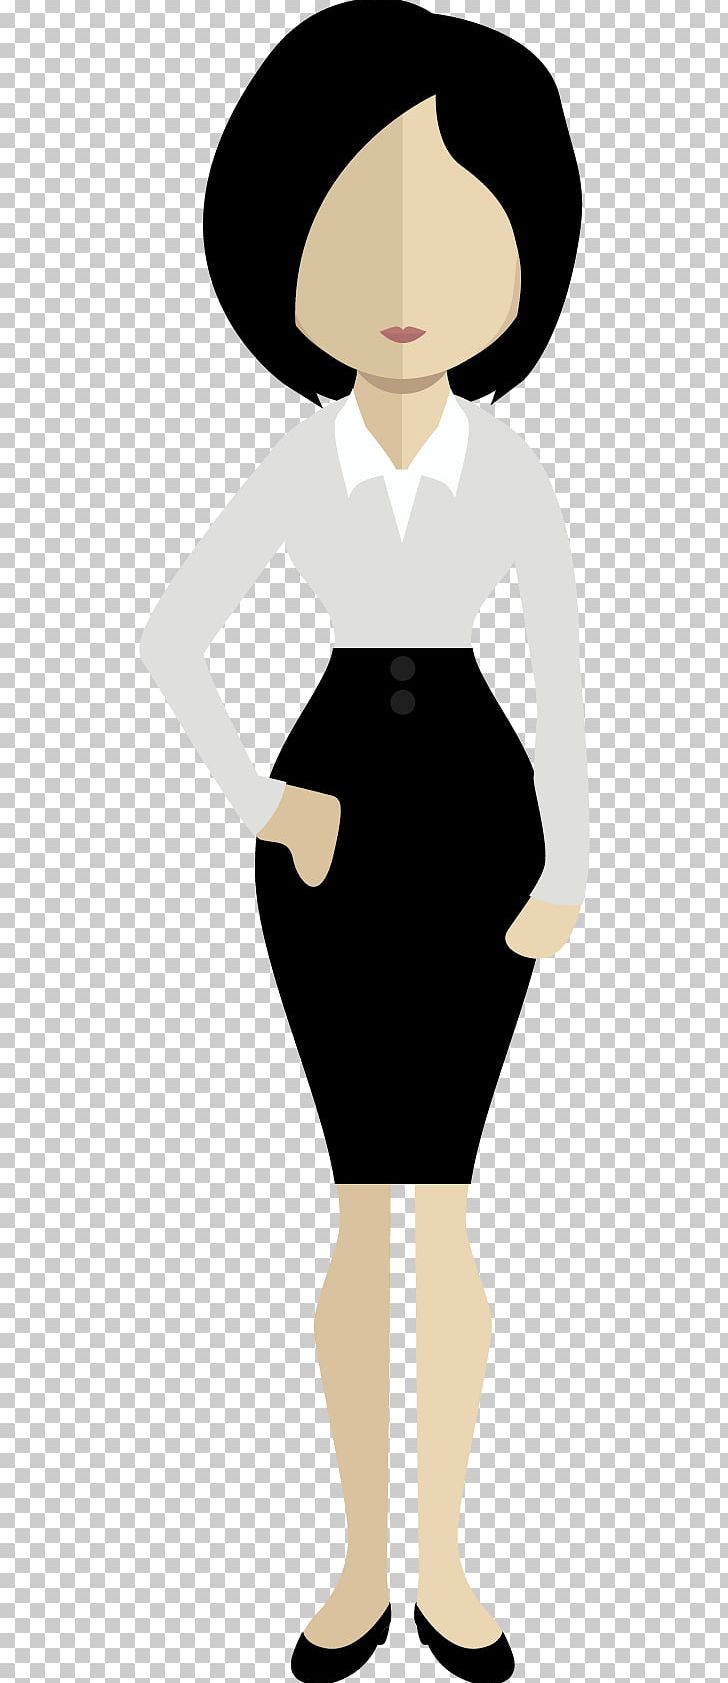 Drawing Cartoon Dessin Animxe9 PNG, Clipart, Animation, Black Hair, Business, Encapsulated Postscript, Female Hair Free PNG Download